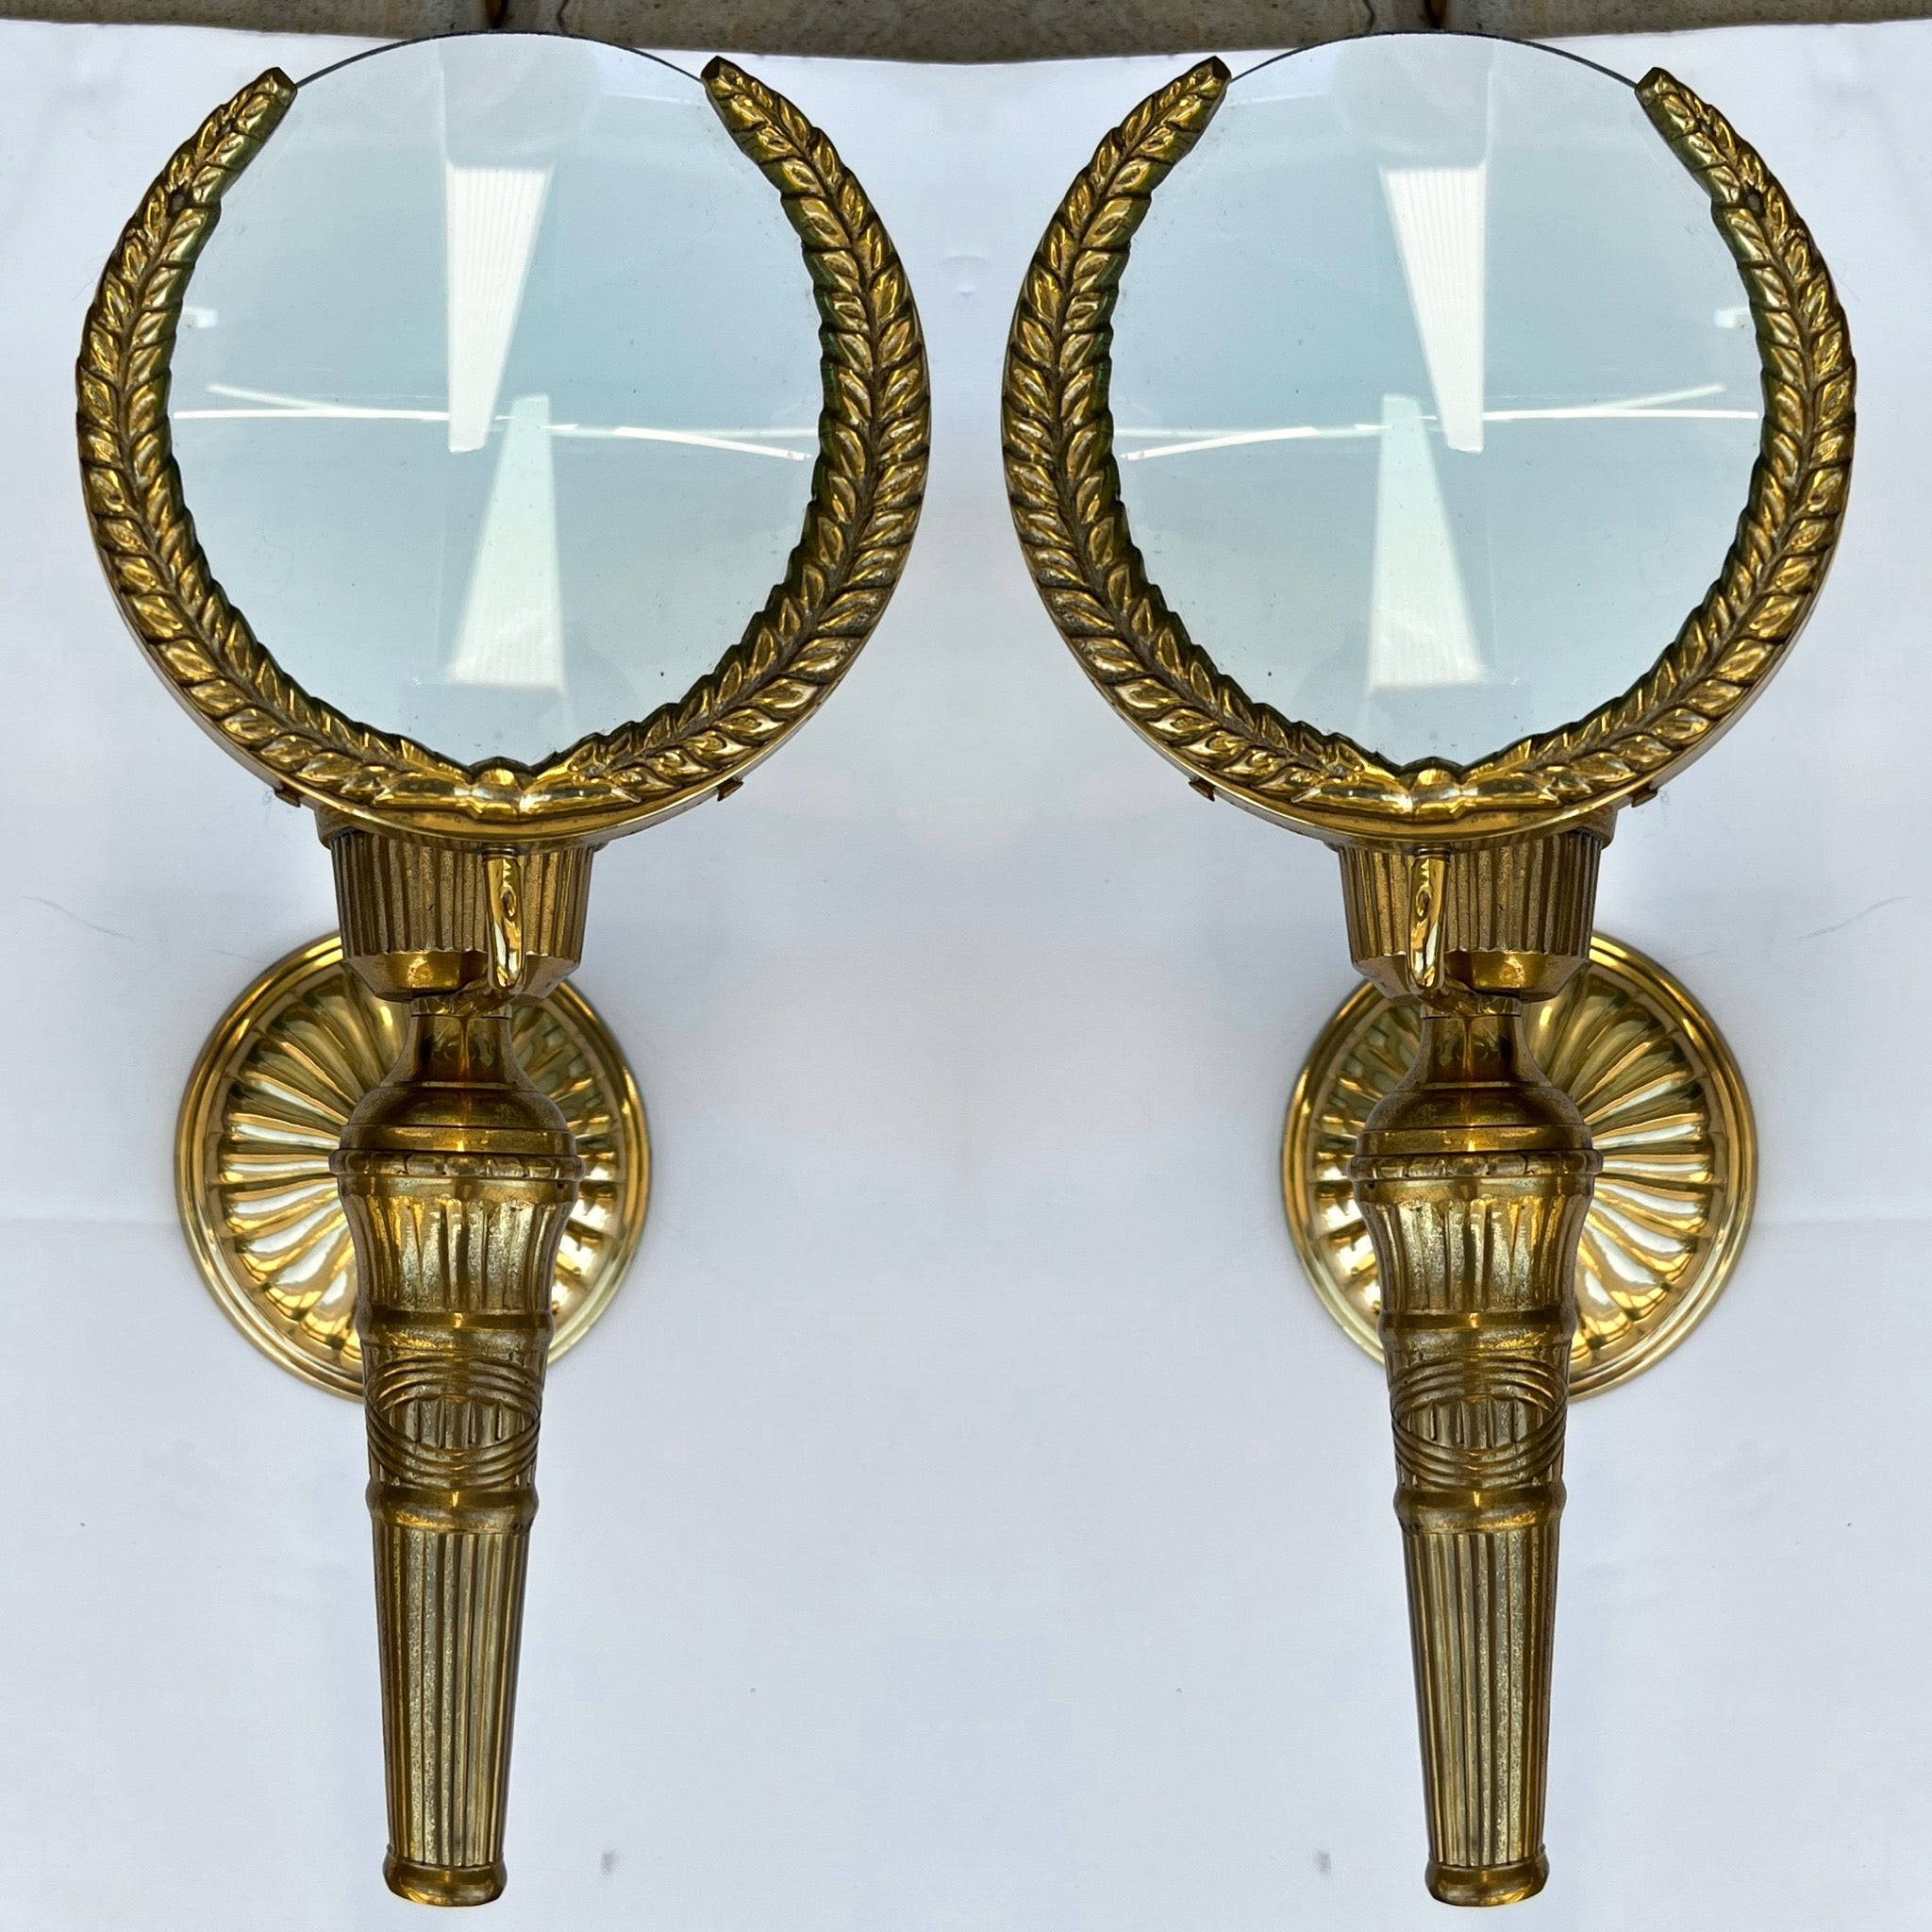 This is a pair of mid-century cast brass magnifying glass sconces. They are not electrified and are unmarked. They are in very good condition.